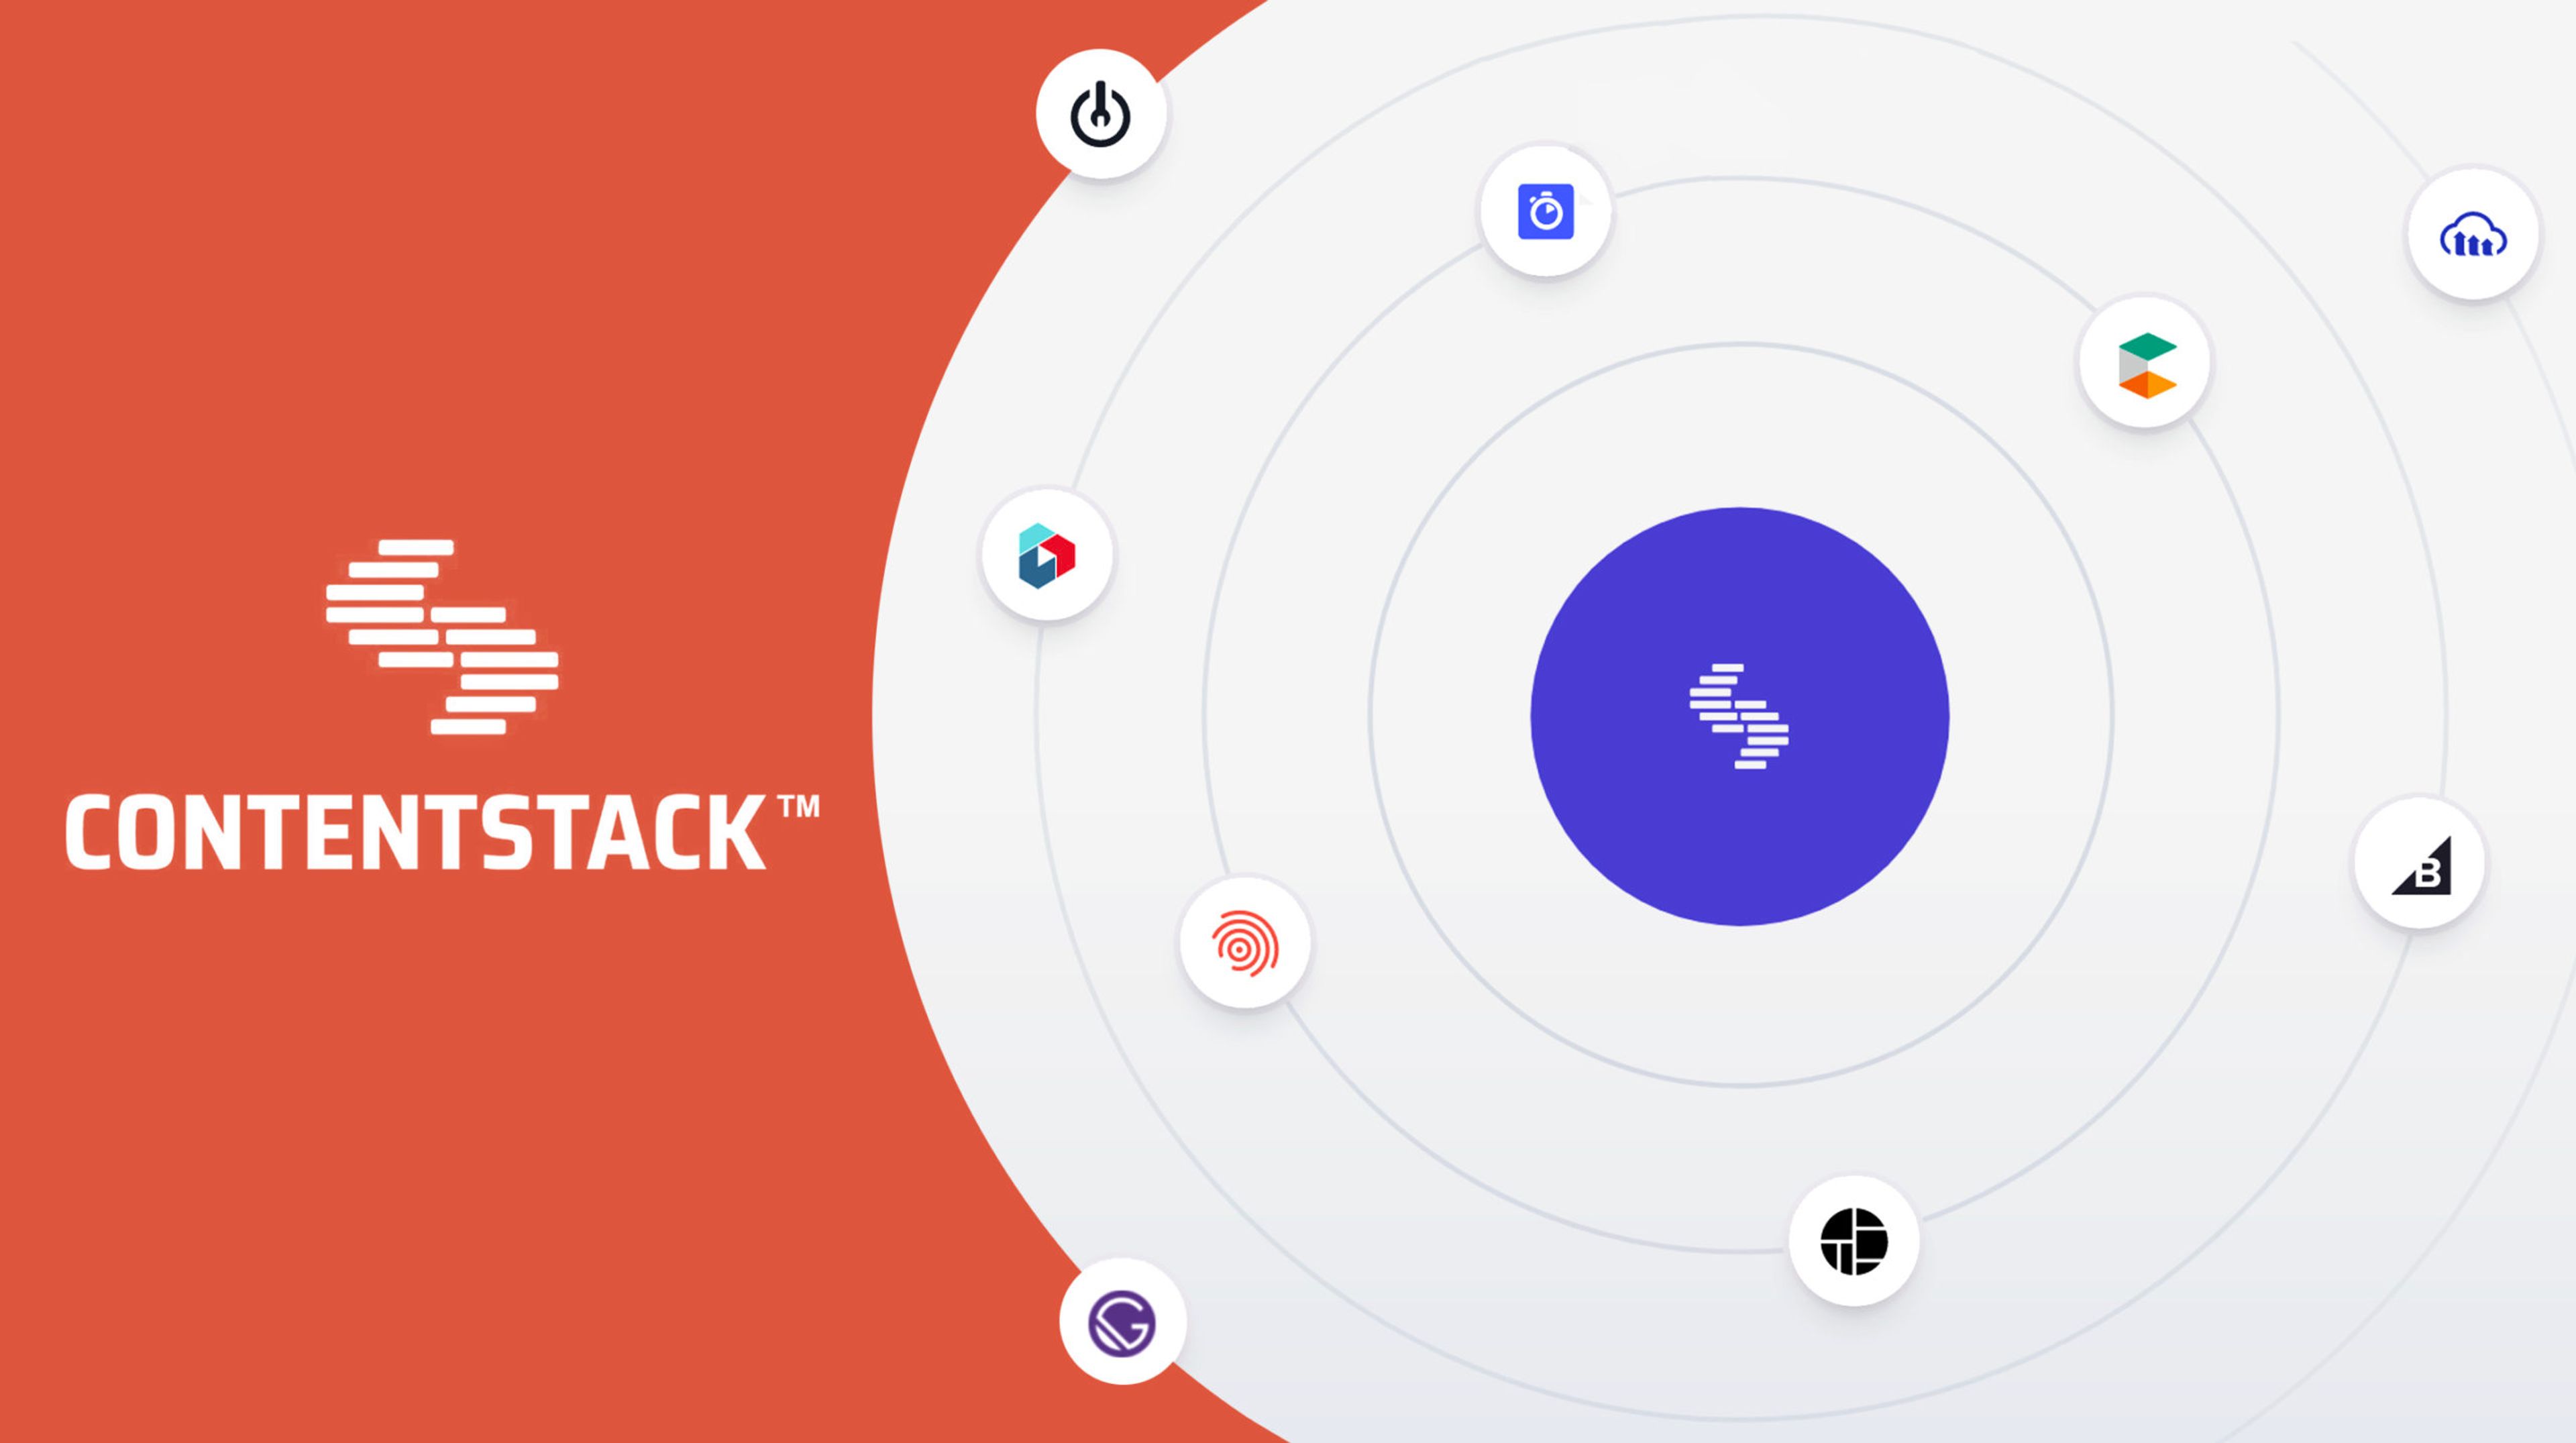 Image of Contentstack logo with orbs floating with various integration partner logo icons